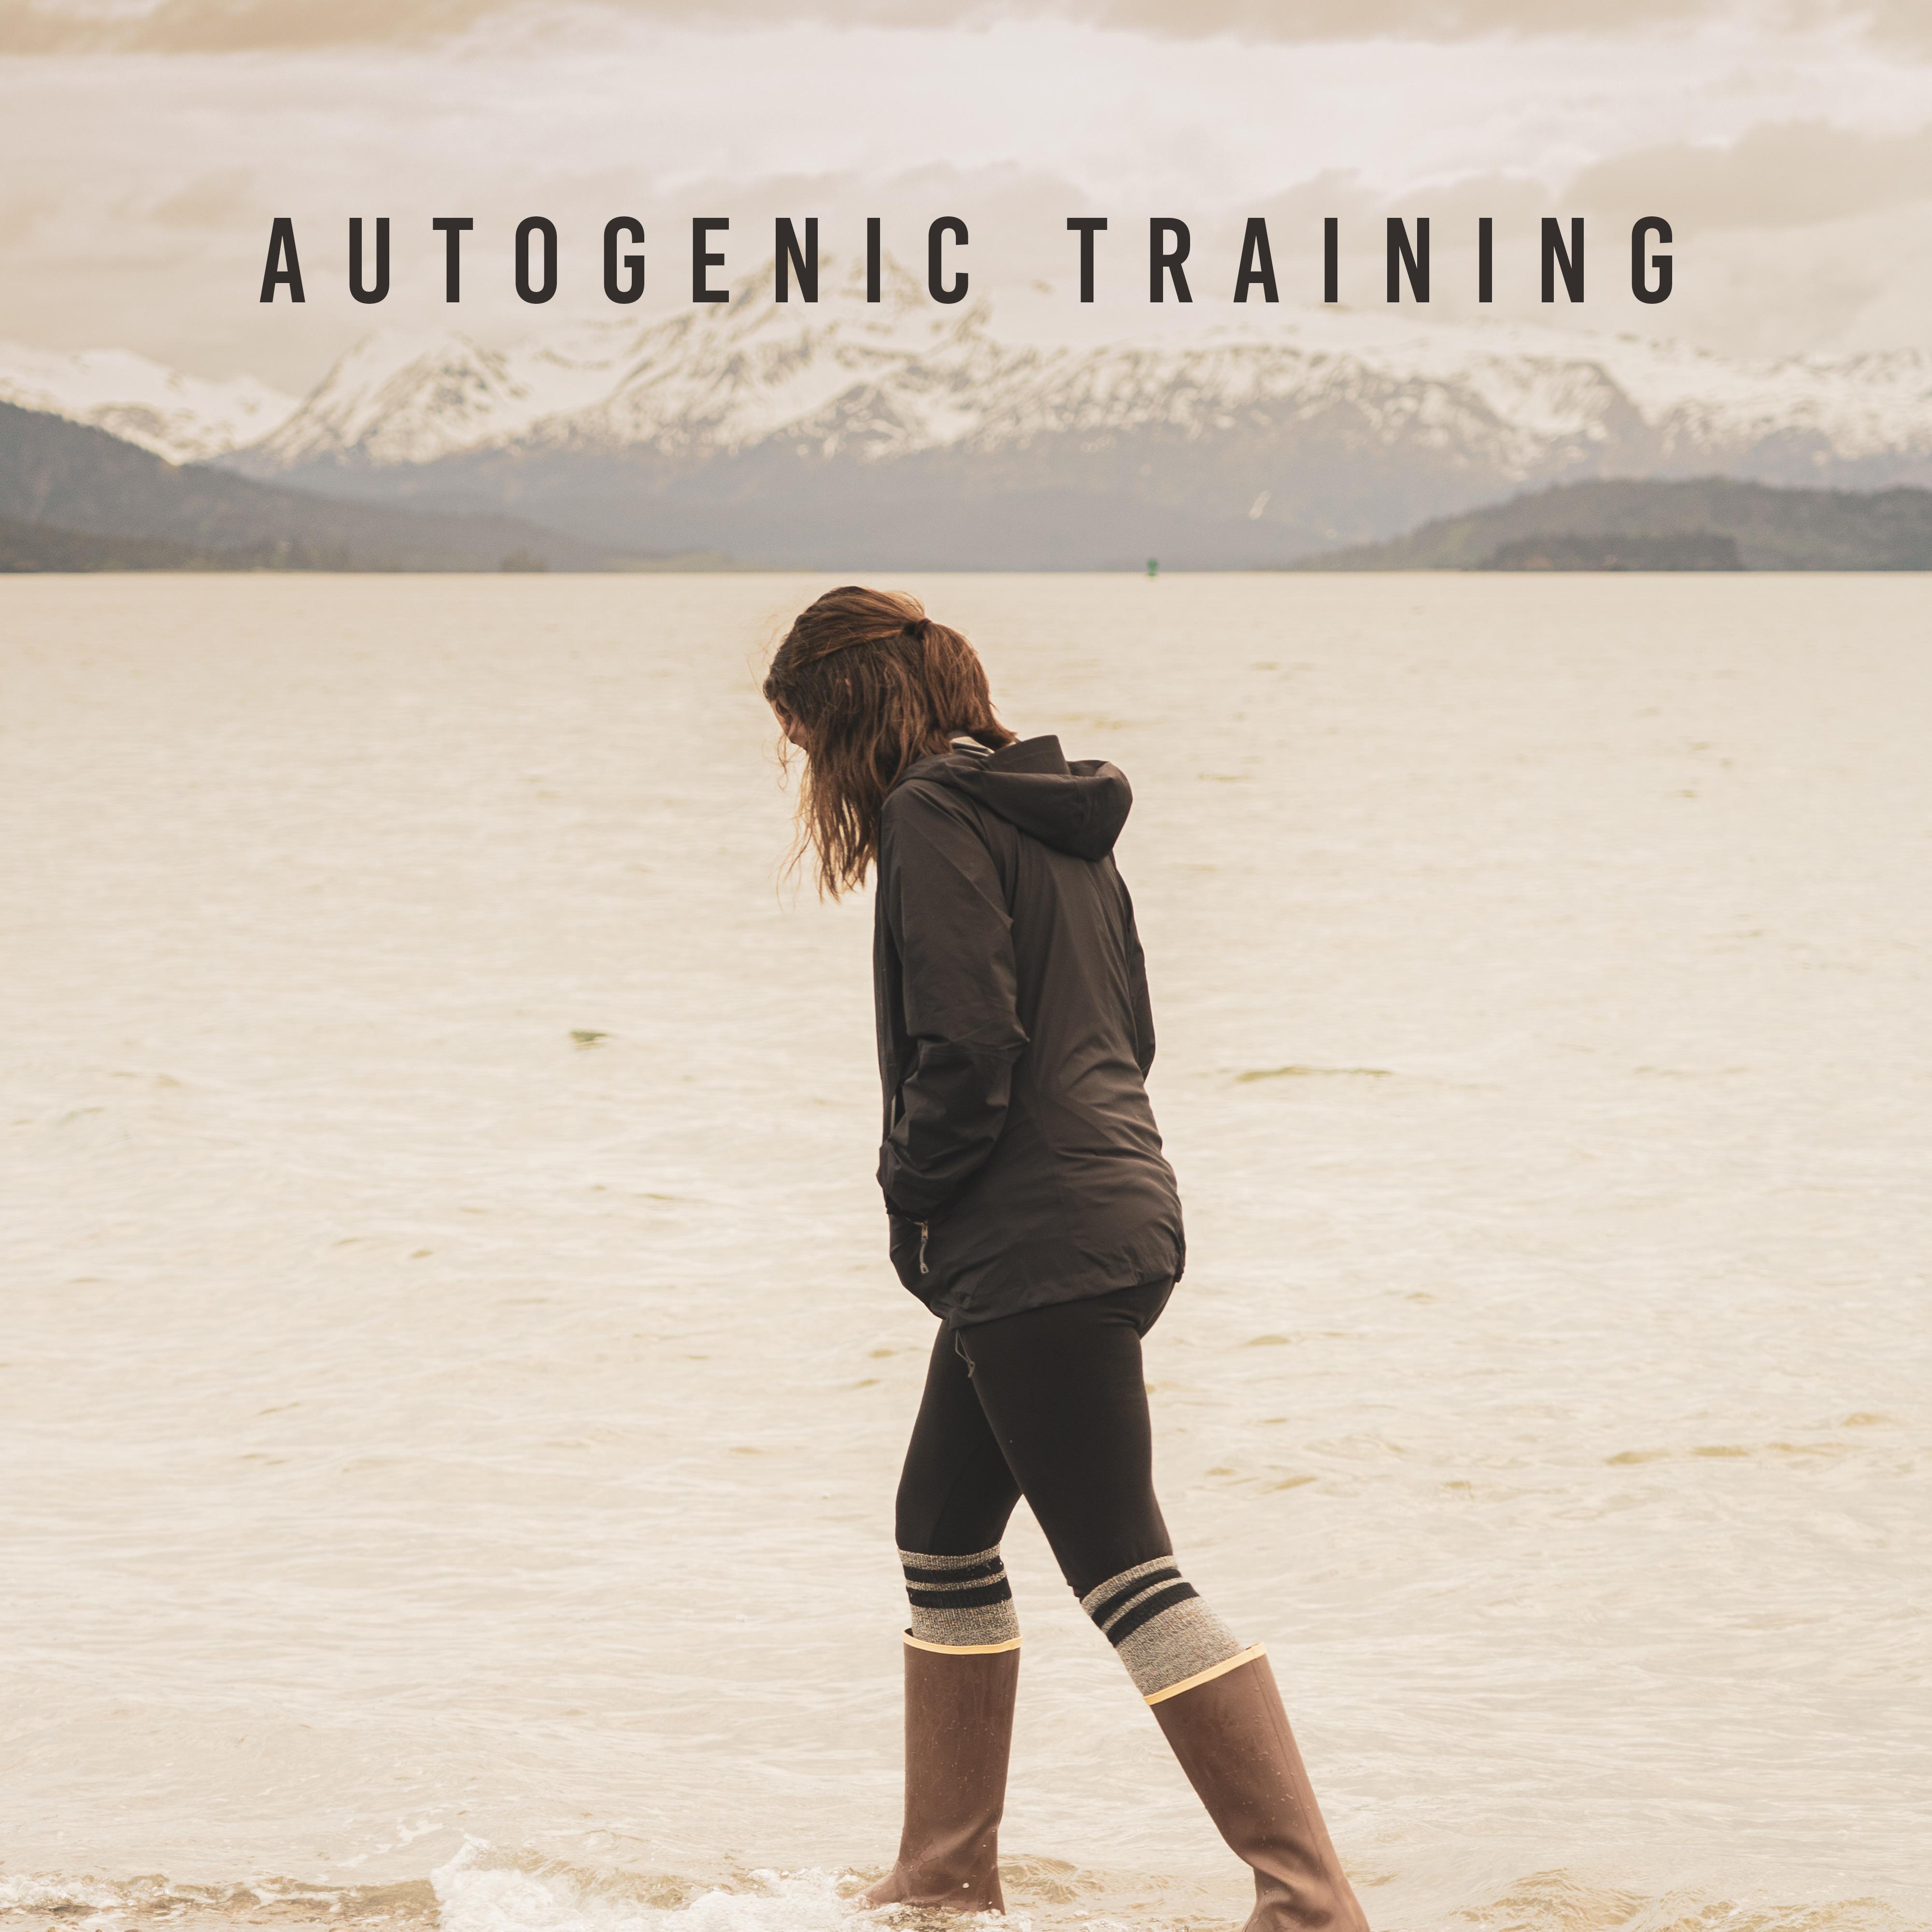 Autogenic Training  Soothing Music for Relaxation Exercises, Calming and Relieving Stress and Tension, for Problems with Neurosis, Negative Emotions, Insomnia and Sleeping Problems